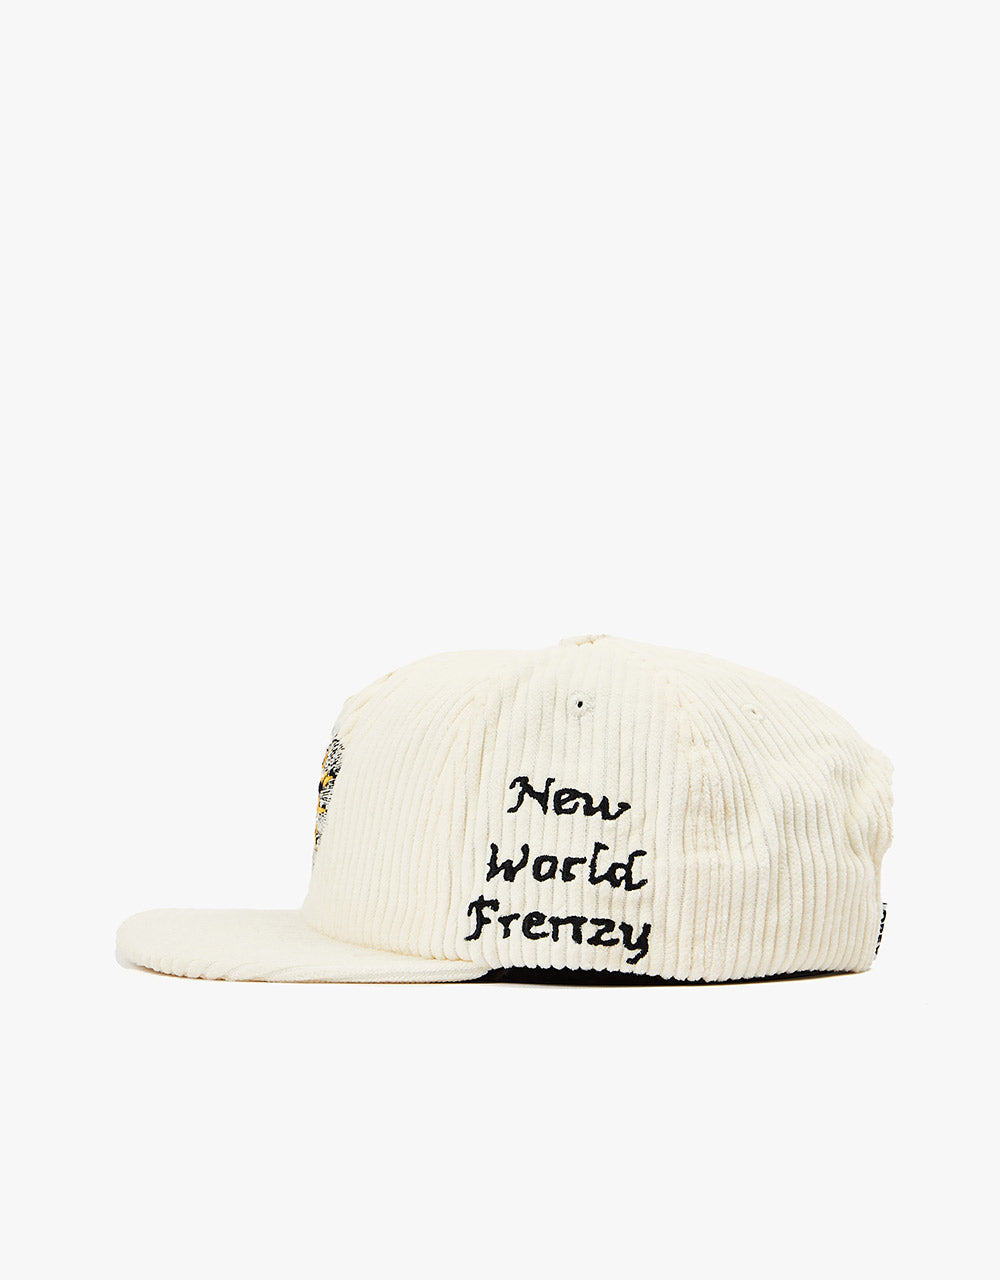 Obey Frenzy Snapback Cap - Unbleached